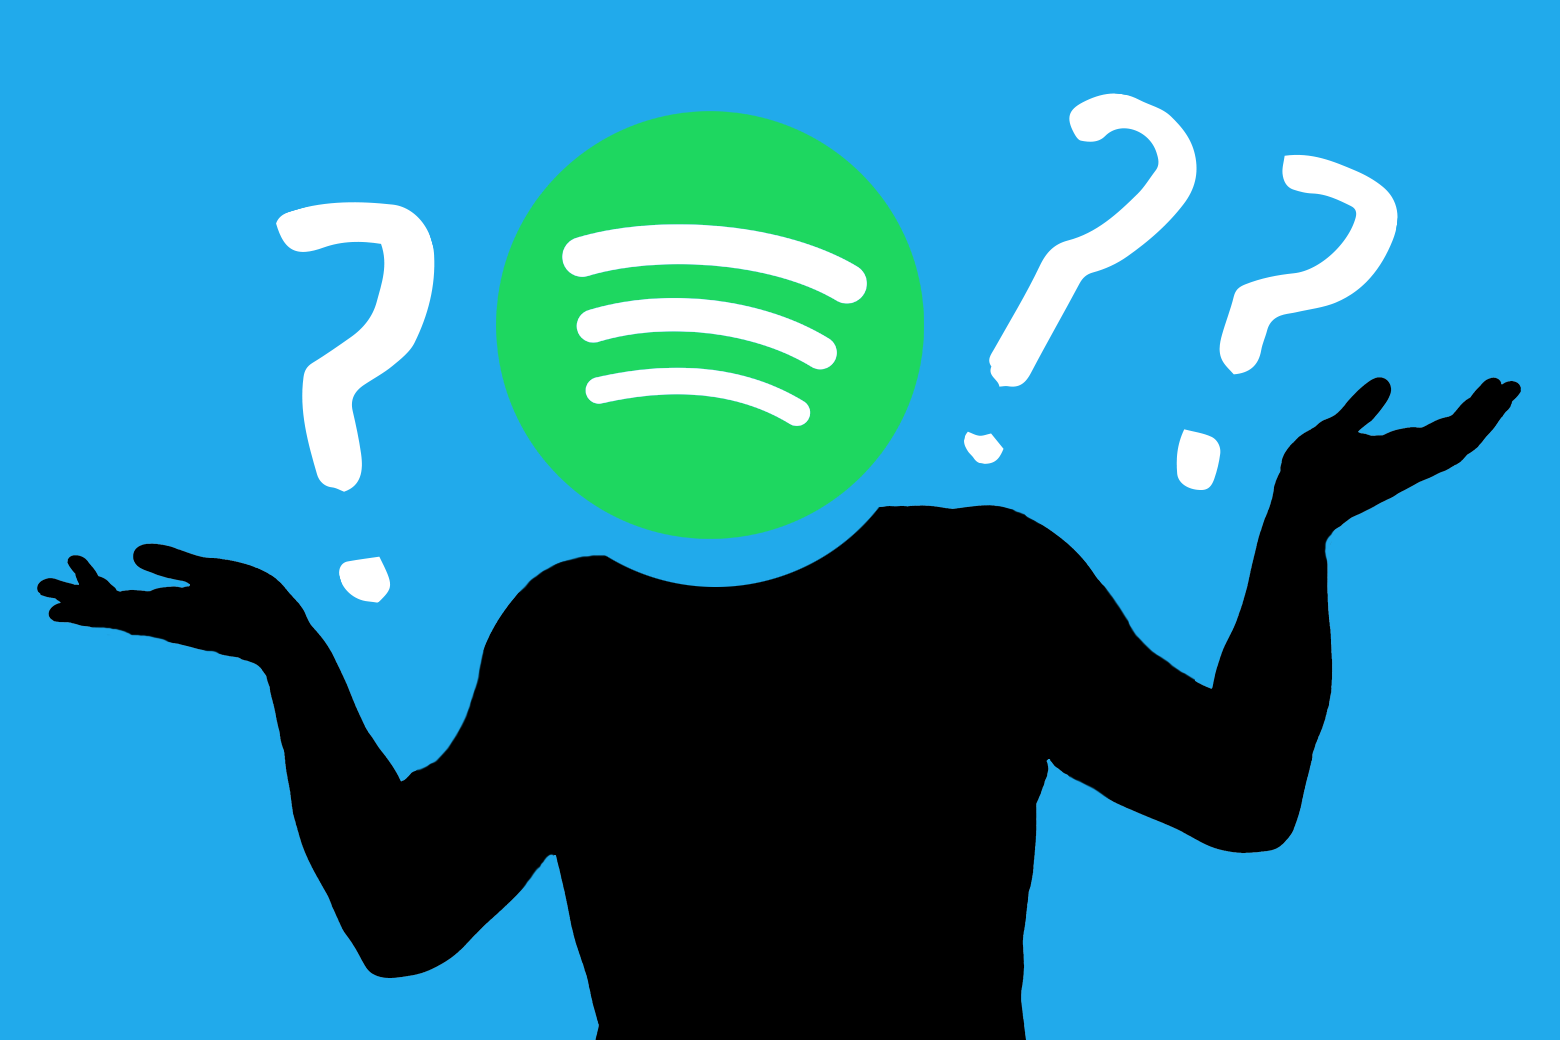 Spotify confused about its next move.